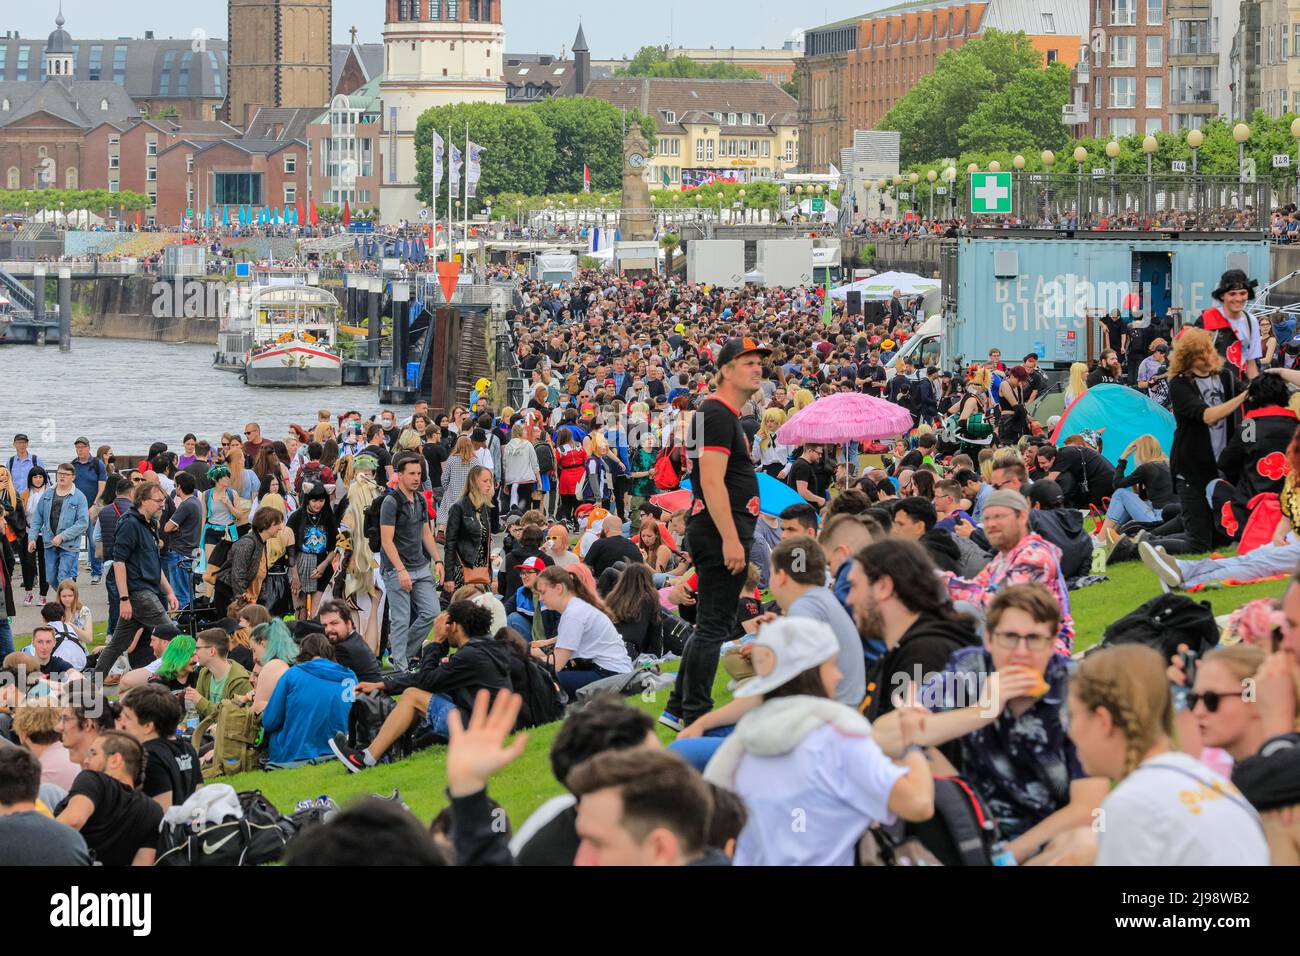 Düsseldorf, NRW, Germany. 21st May, 2022. The river bank is packed with people. Tens of thousands of visitors and cosplayers enjoy the warm sunshine along the river Rhine embankment in their outfits inspired by Japanese anime, video and games. Stage performances, cosplay, stalls and demonstrations of Japanese culture, sports and traditions are featured at Düsseldorf's annual Japan Day, celebrating Japan and the Japanese community in the city. Düsseldorf is home to the largest Japanese community in Germany. Credit: Imageplotter/Alamy Live News Stock Photo